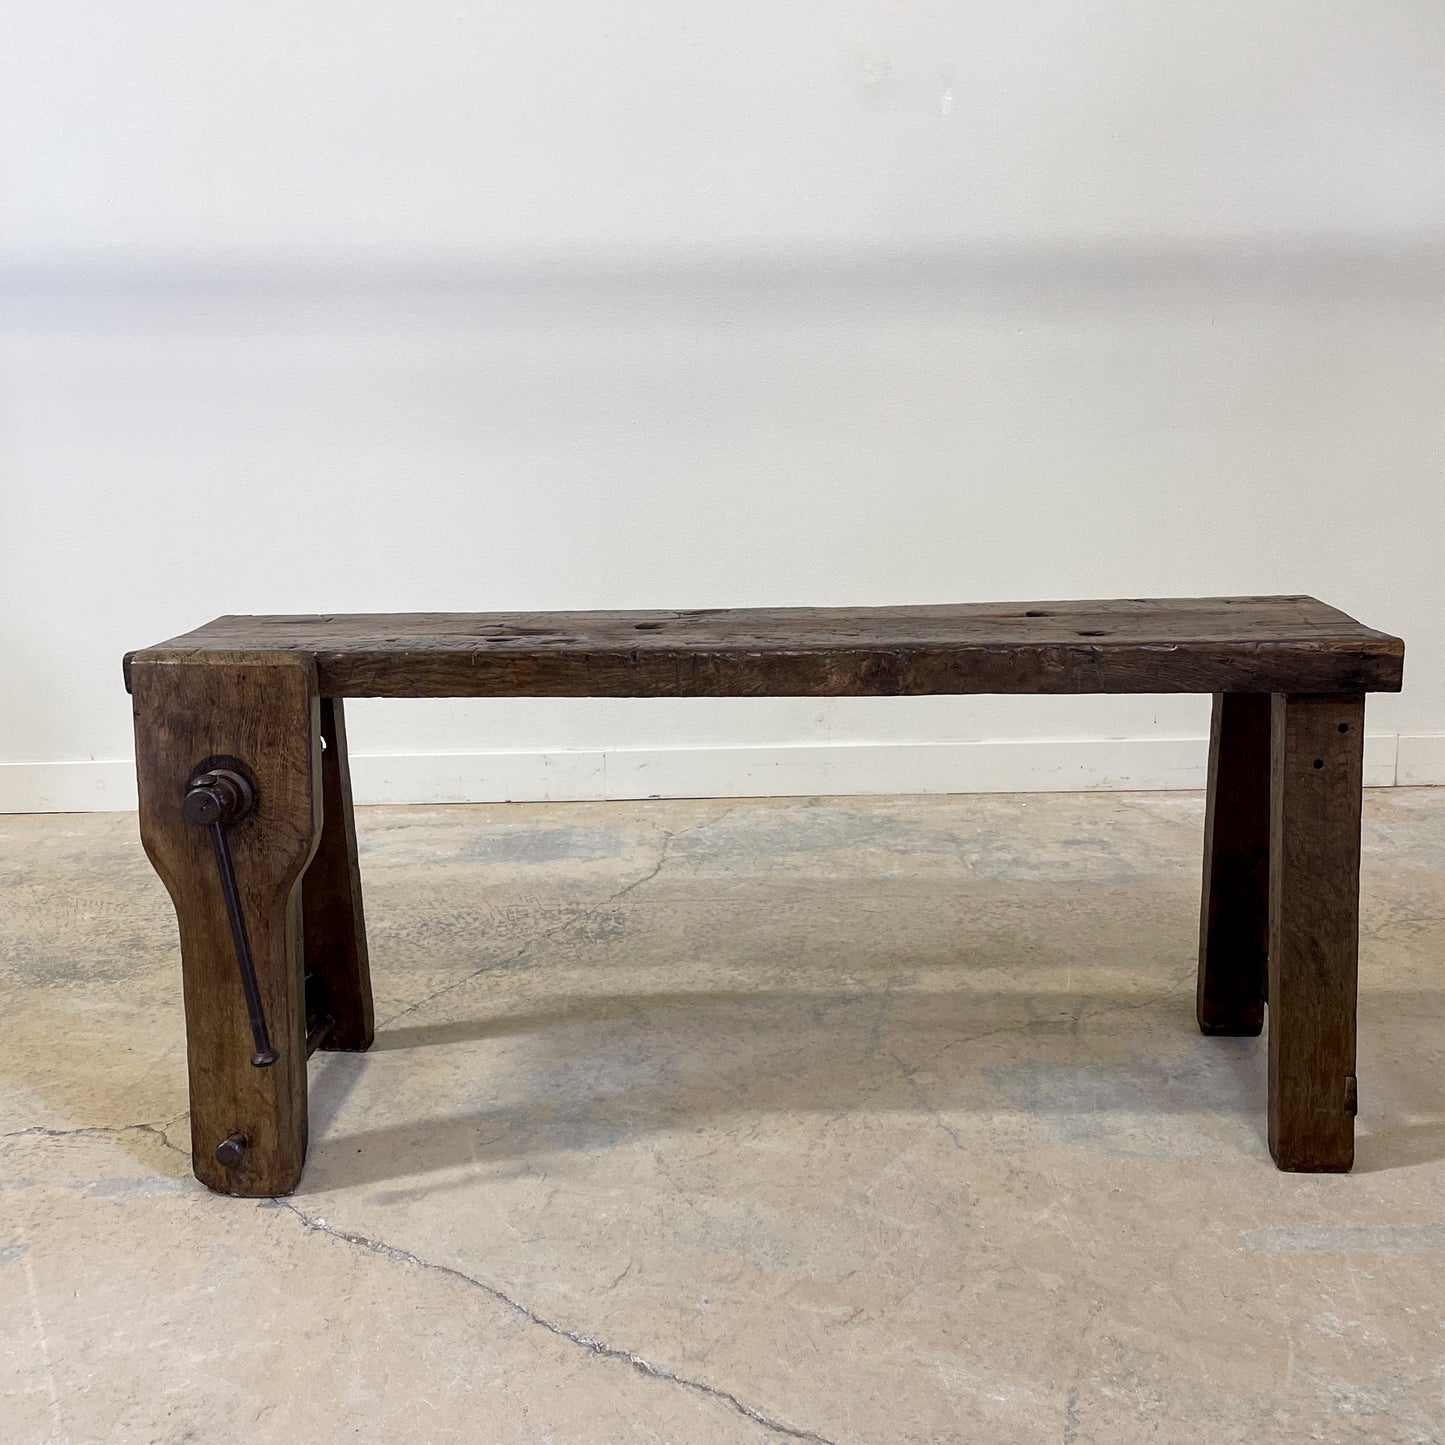 Wood Workers Bench